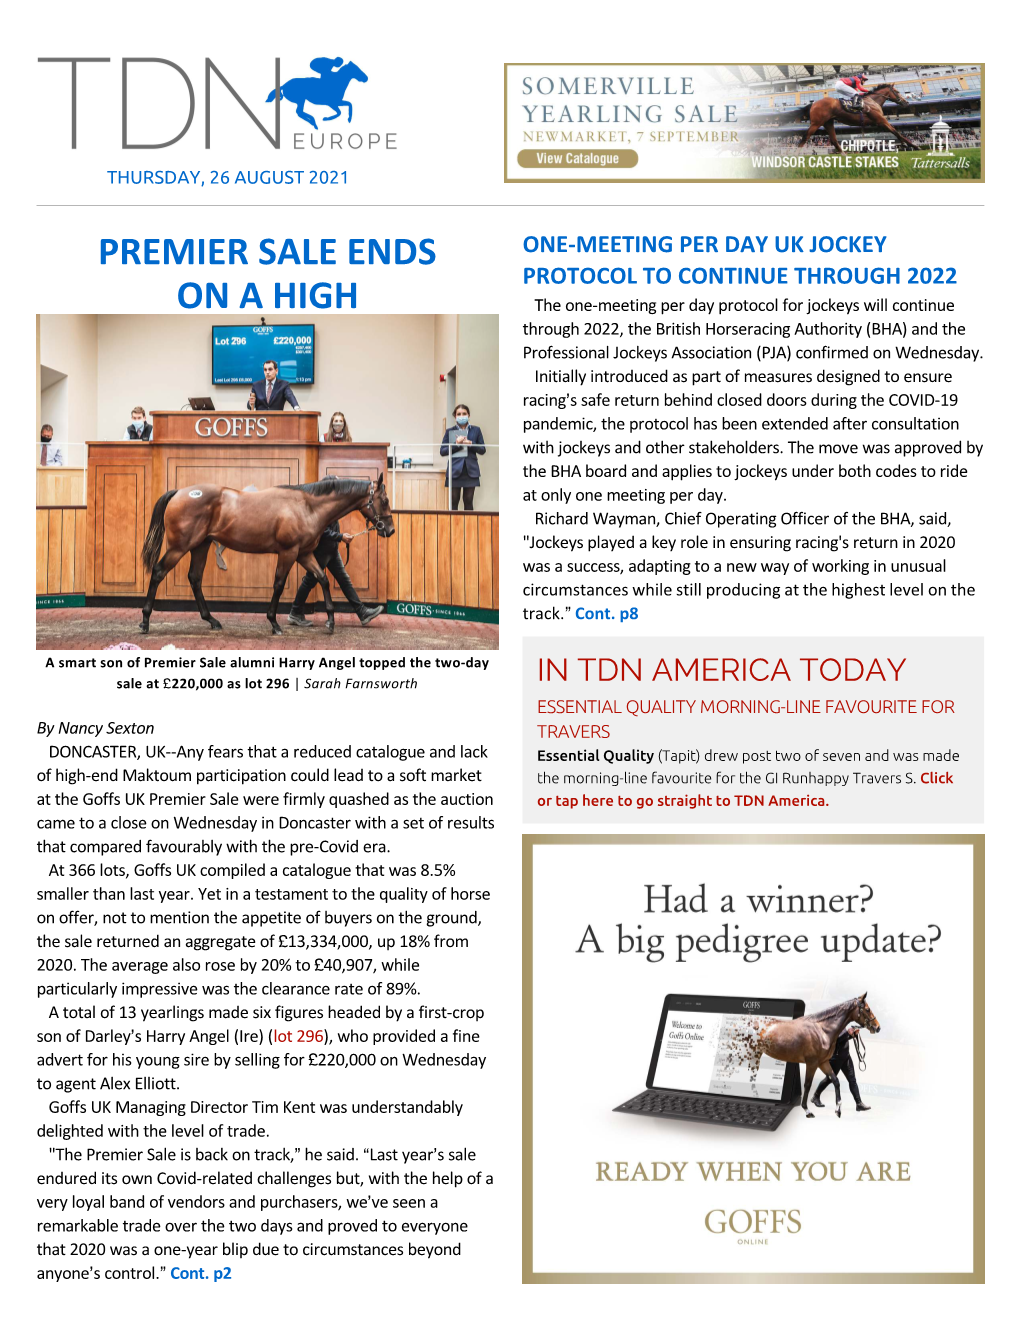 PREMIER SALE ENDS on a HIGH Positions Were Drawn Wednesday Morning for Saturday's GI the Goffs UK Premier Yearling Sale Concluded on Runhappy Travers S